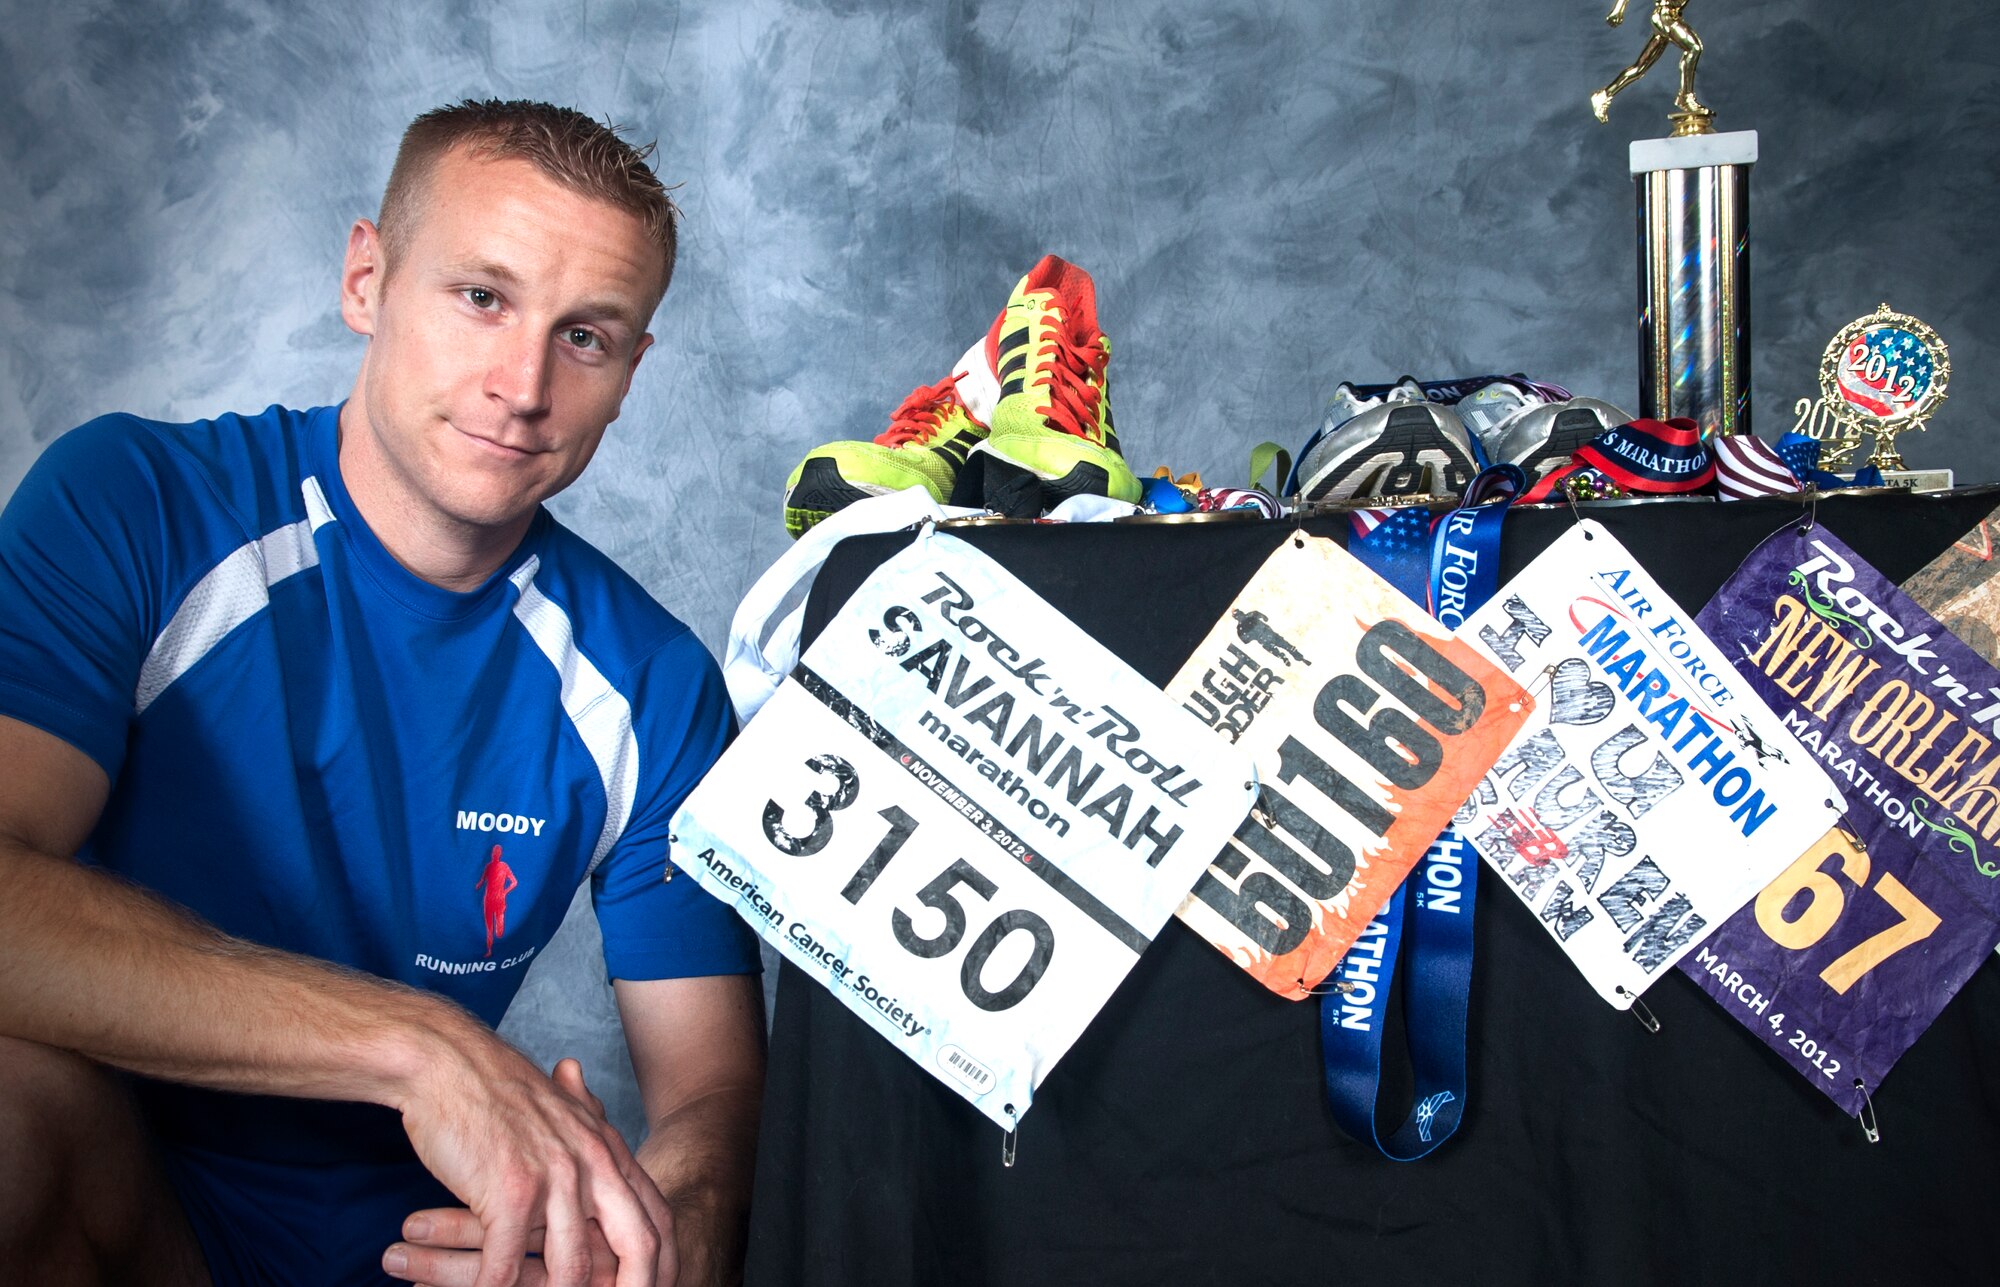 U.S. Air Force Tech. Sgt. Aaron Williams, 372nd Training Squadron Det. 9 instructor, poses next to his racing bibs and awards from previous marathons at Moody Air Force Base, Ga., Dec. 23, 2013. Since 2010, Williams has run nine full marathons. (U.S. Air Force photo by Senior Airman Eileen Meier/Released)